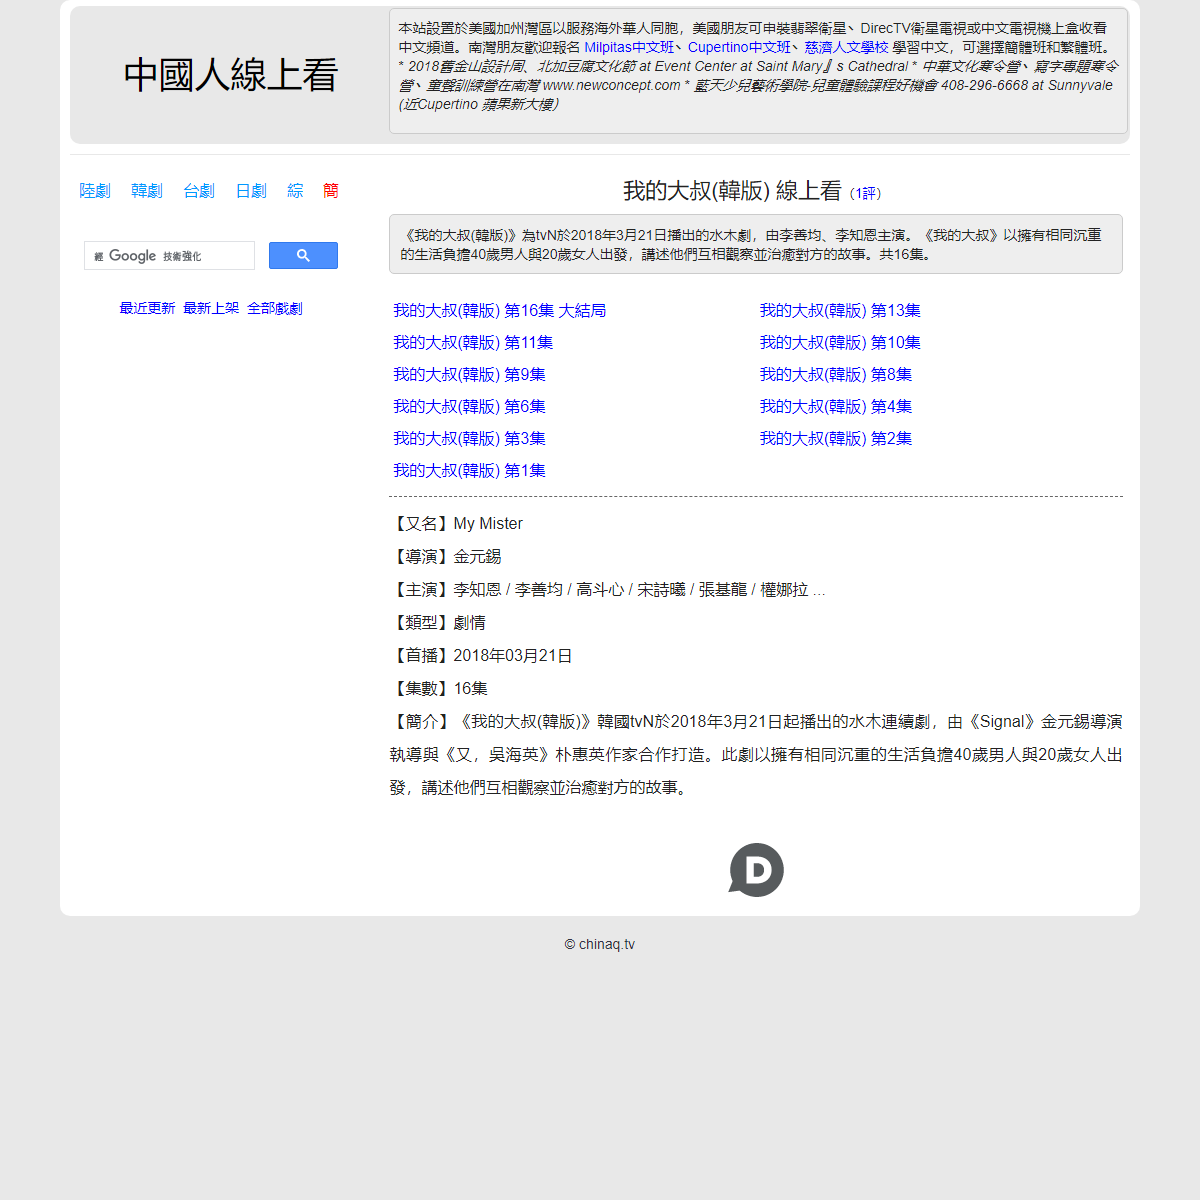 A complete backup of https://chinaq.tv/kr180321/